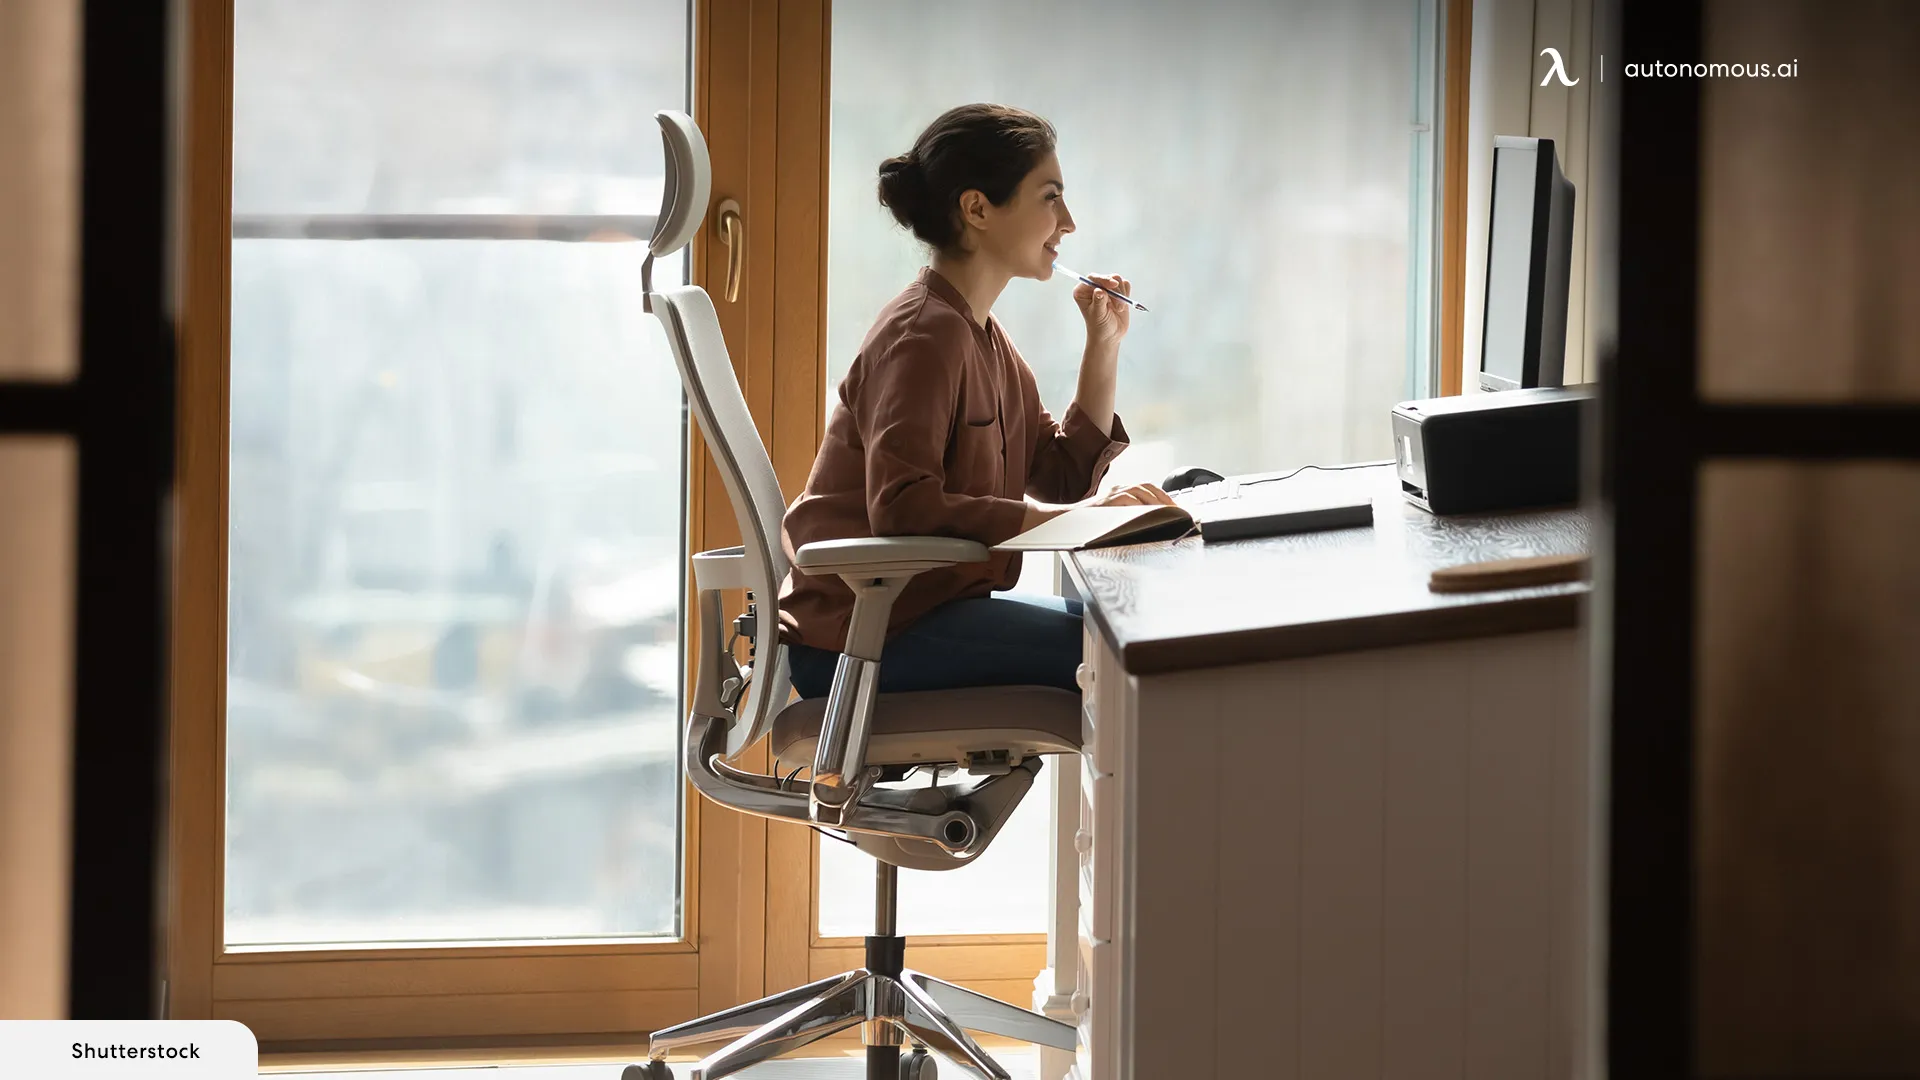 How does a kneeling chair with a desk compare to an ergonomic chair?